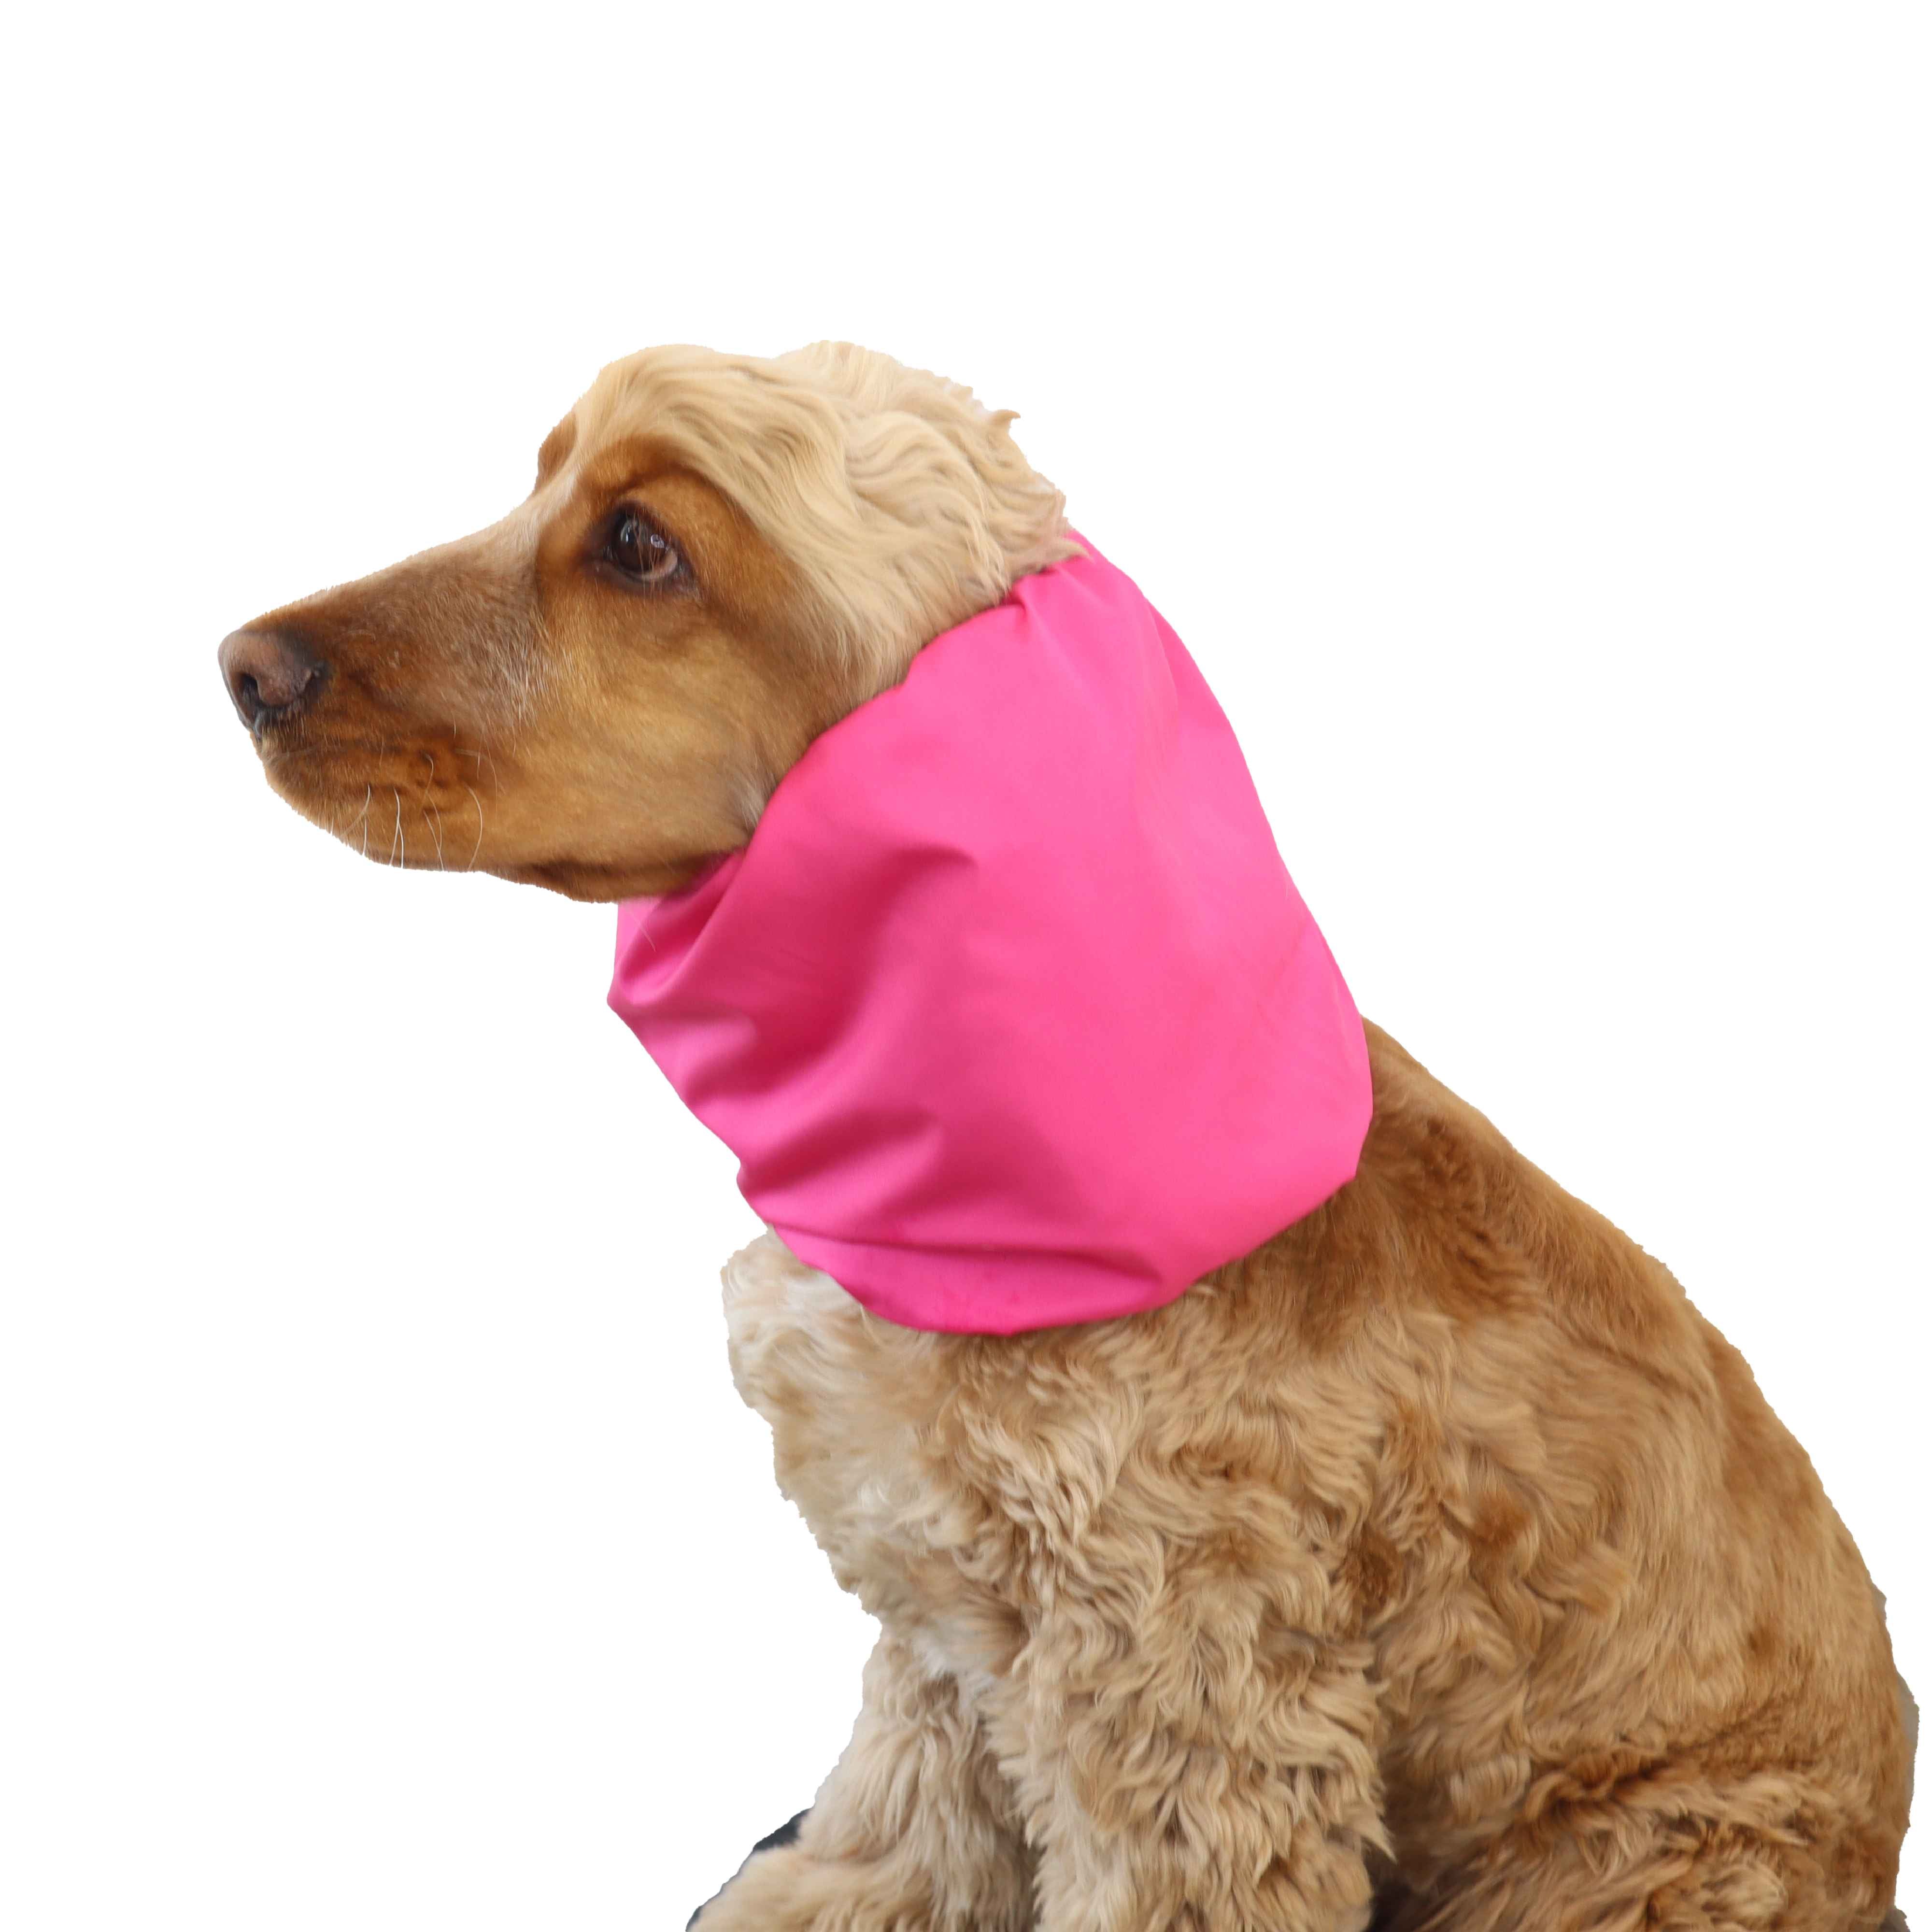 Cute dog with Barbie pink dog snood by Distinguish Me